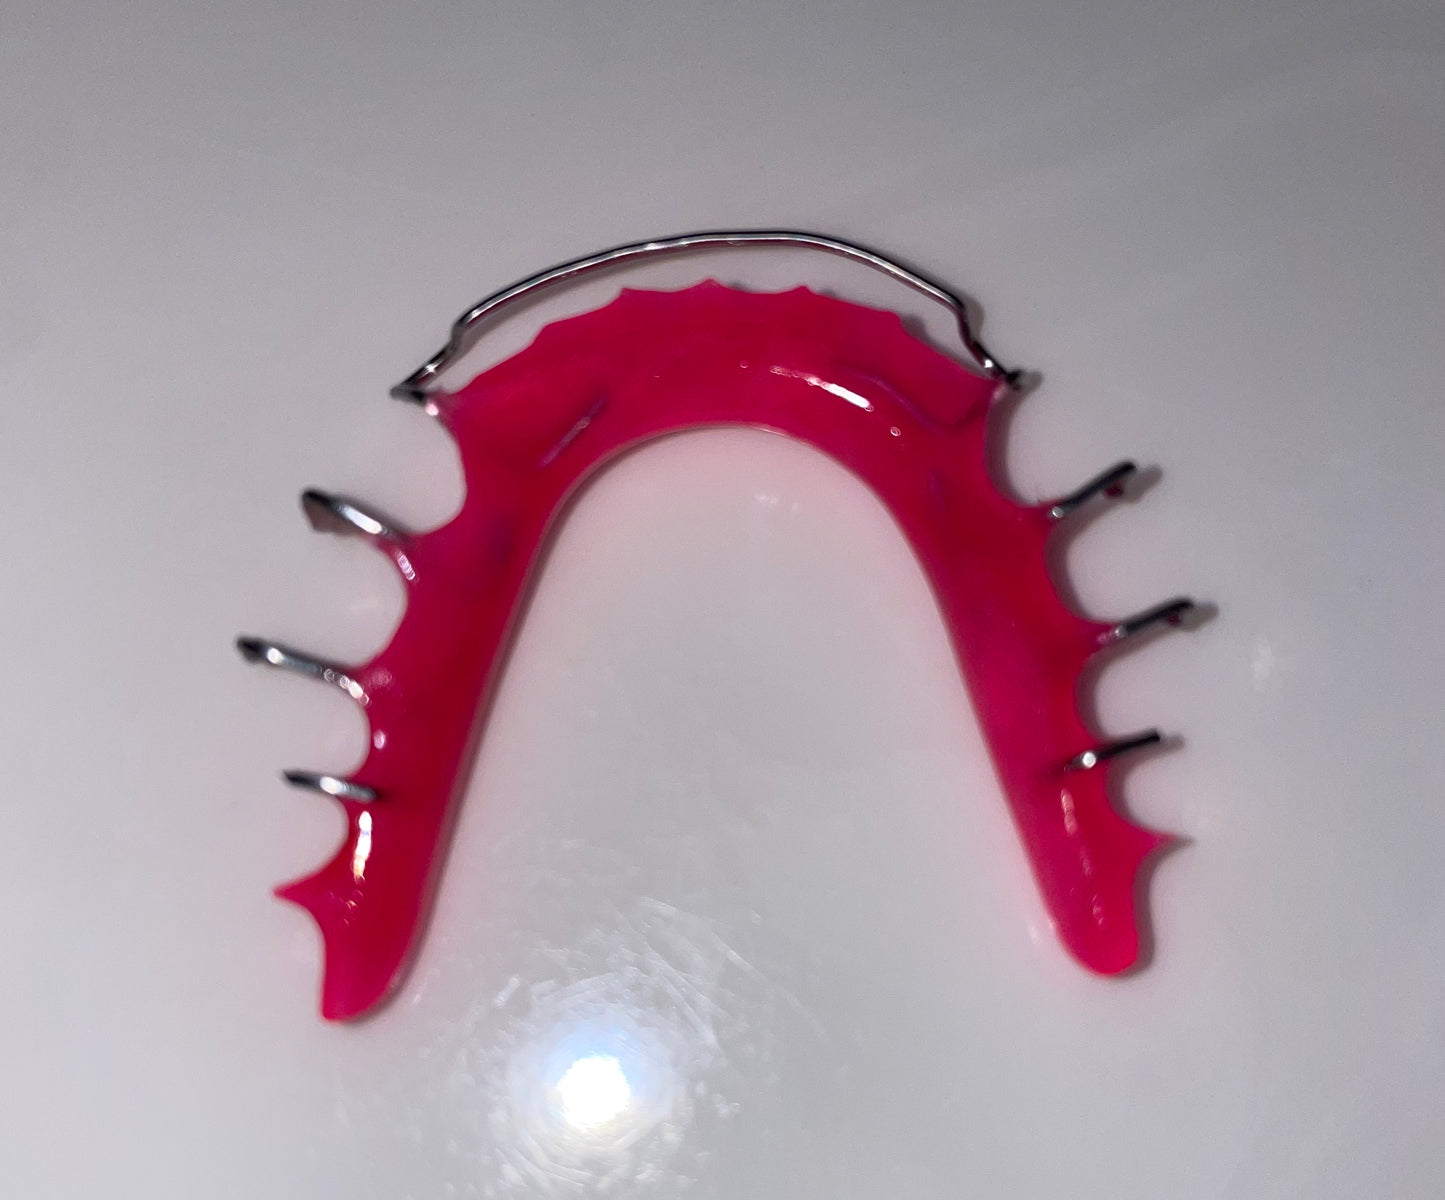 Lower Hot pink Hawley Retainer. Hawley retainer is used to retain teeth. 